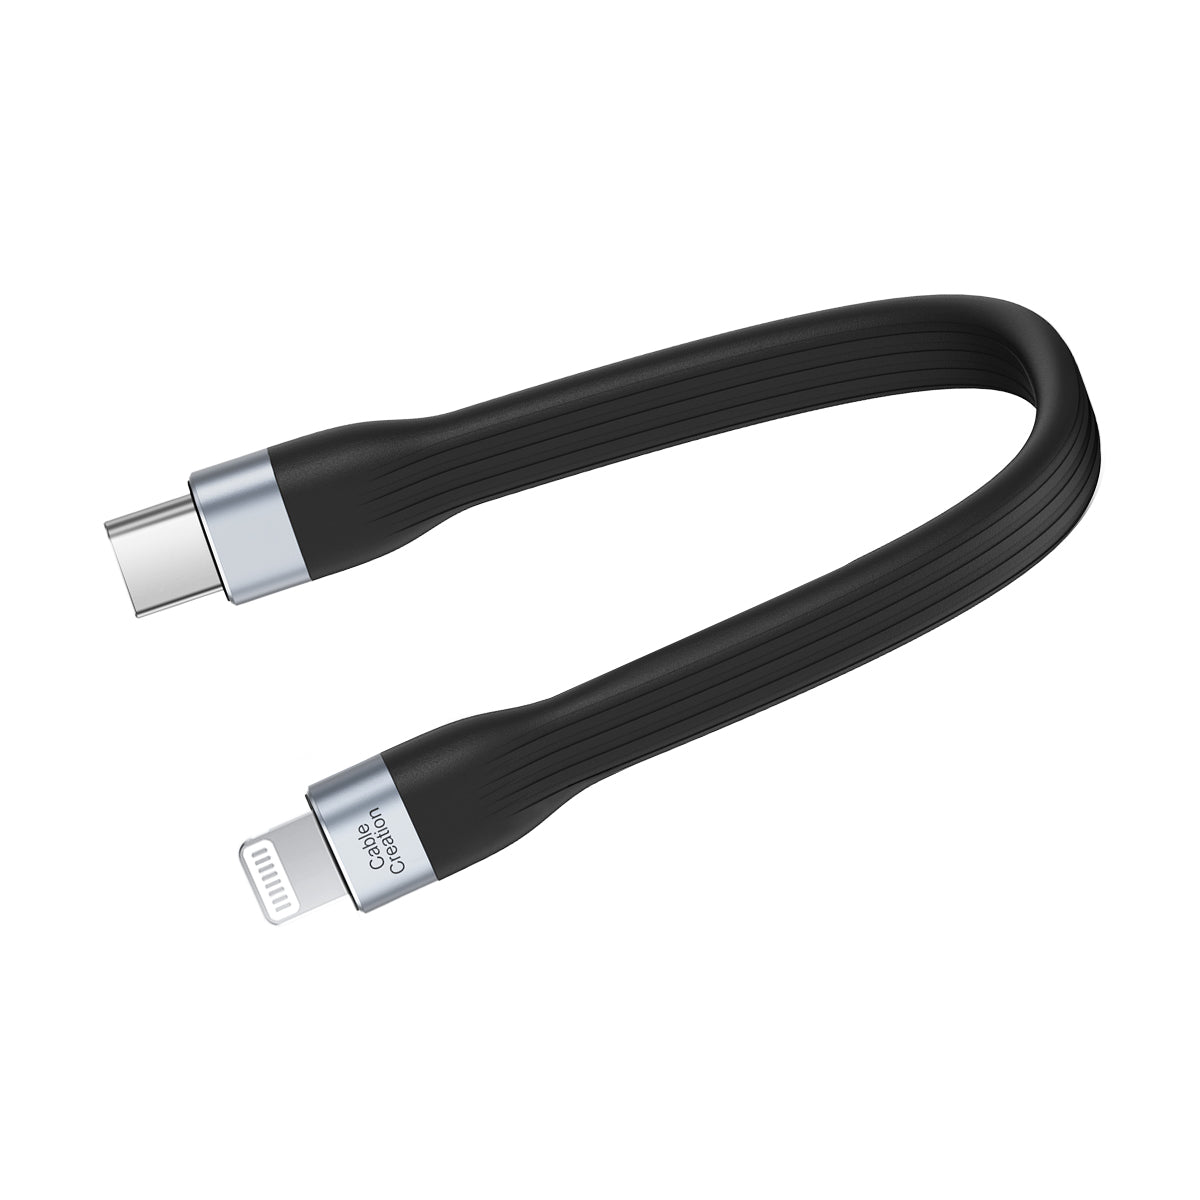 Short Lightning USB C Charger Cable